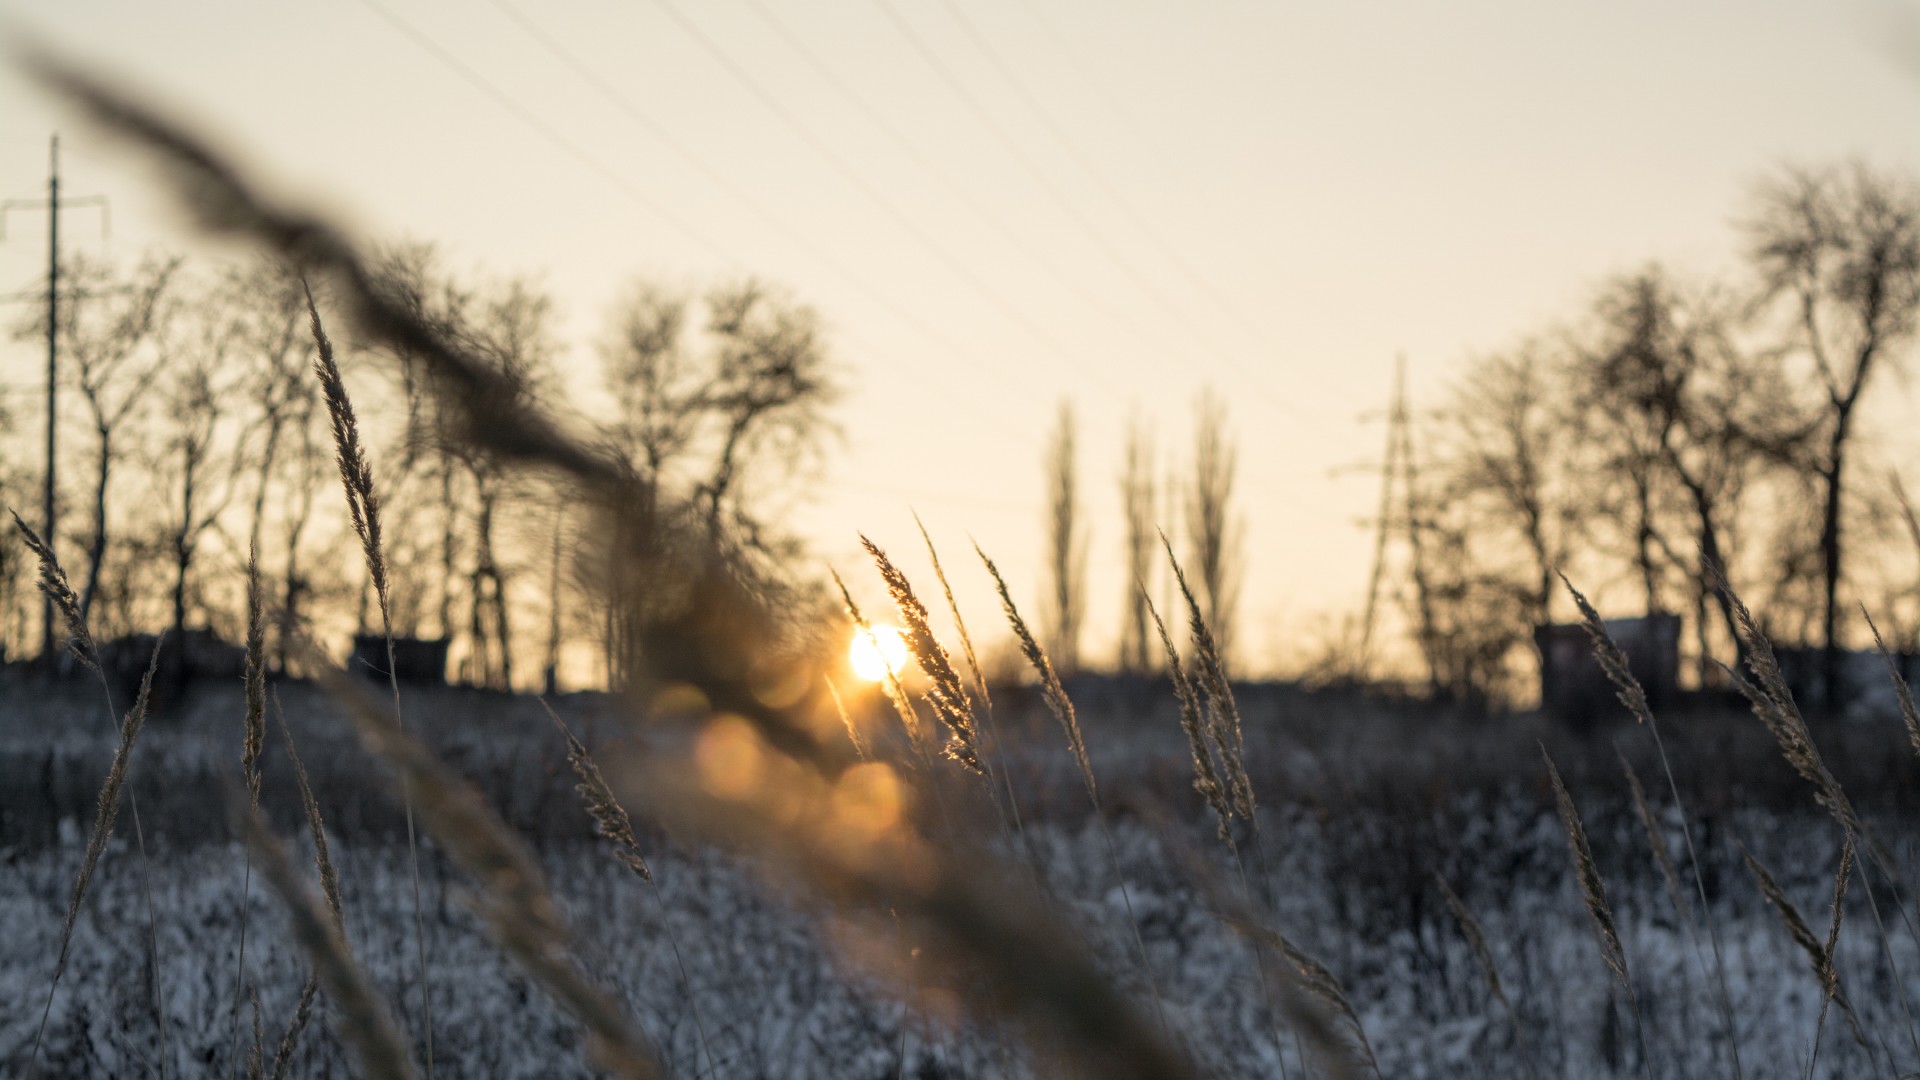 General 1920x1080 field depth of field sunset cold ice sunlight outdoors winter snow